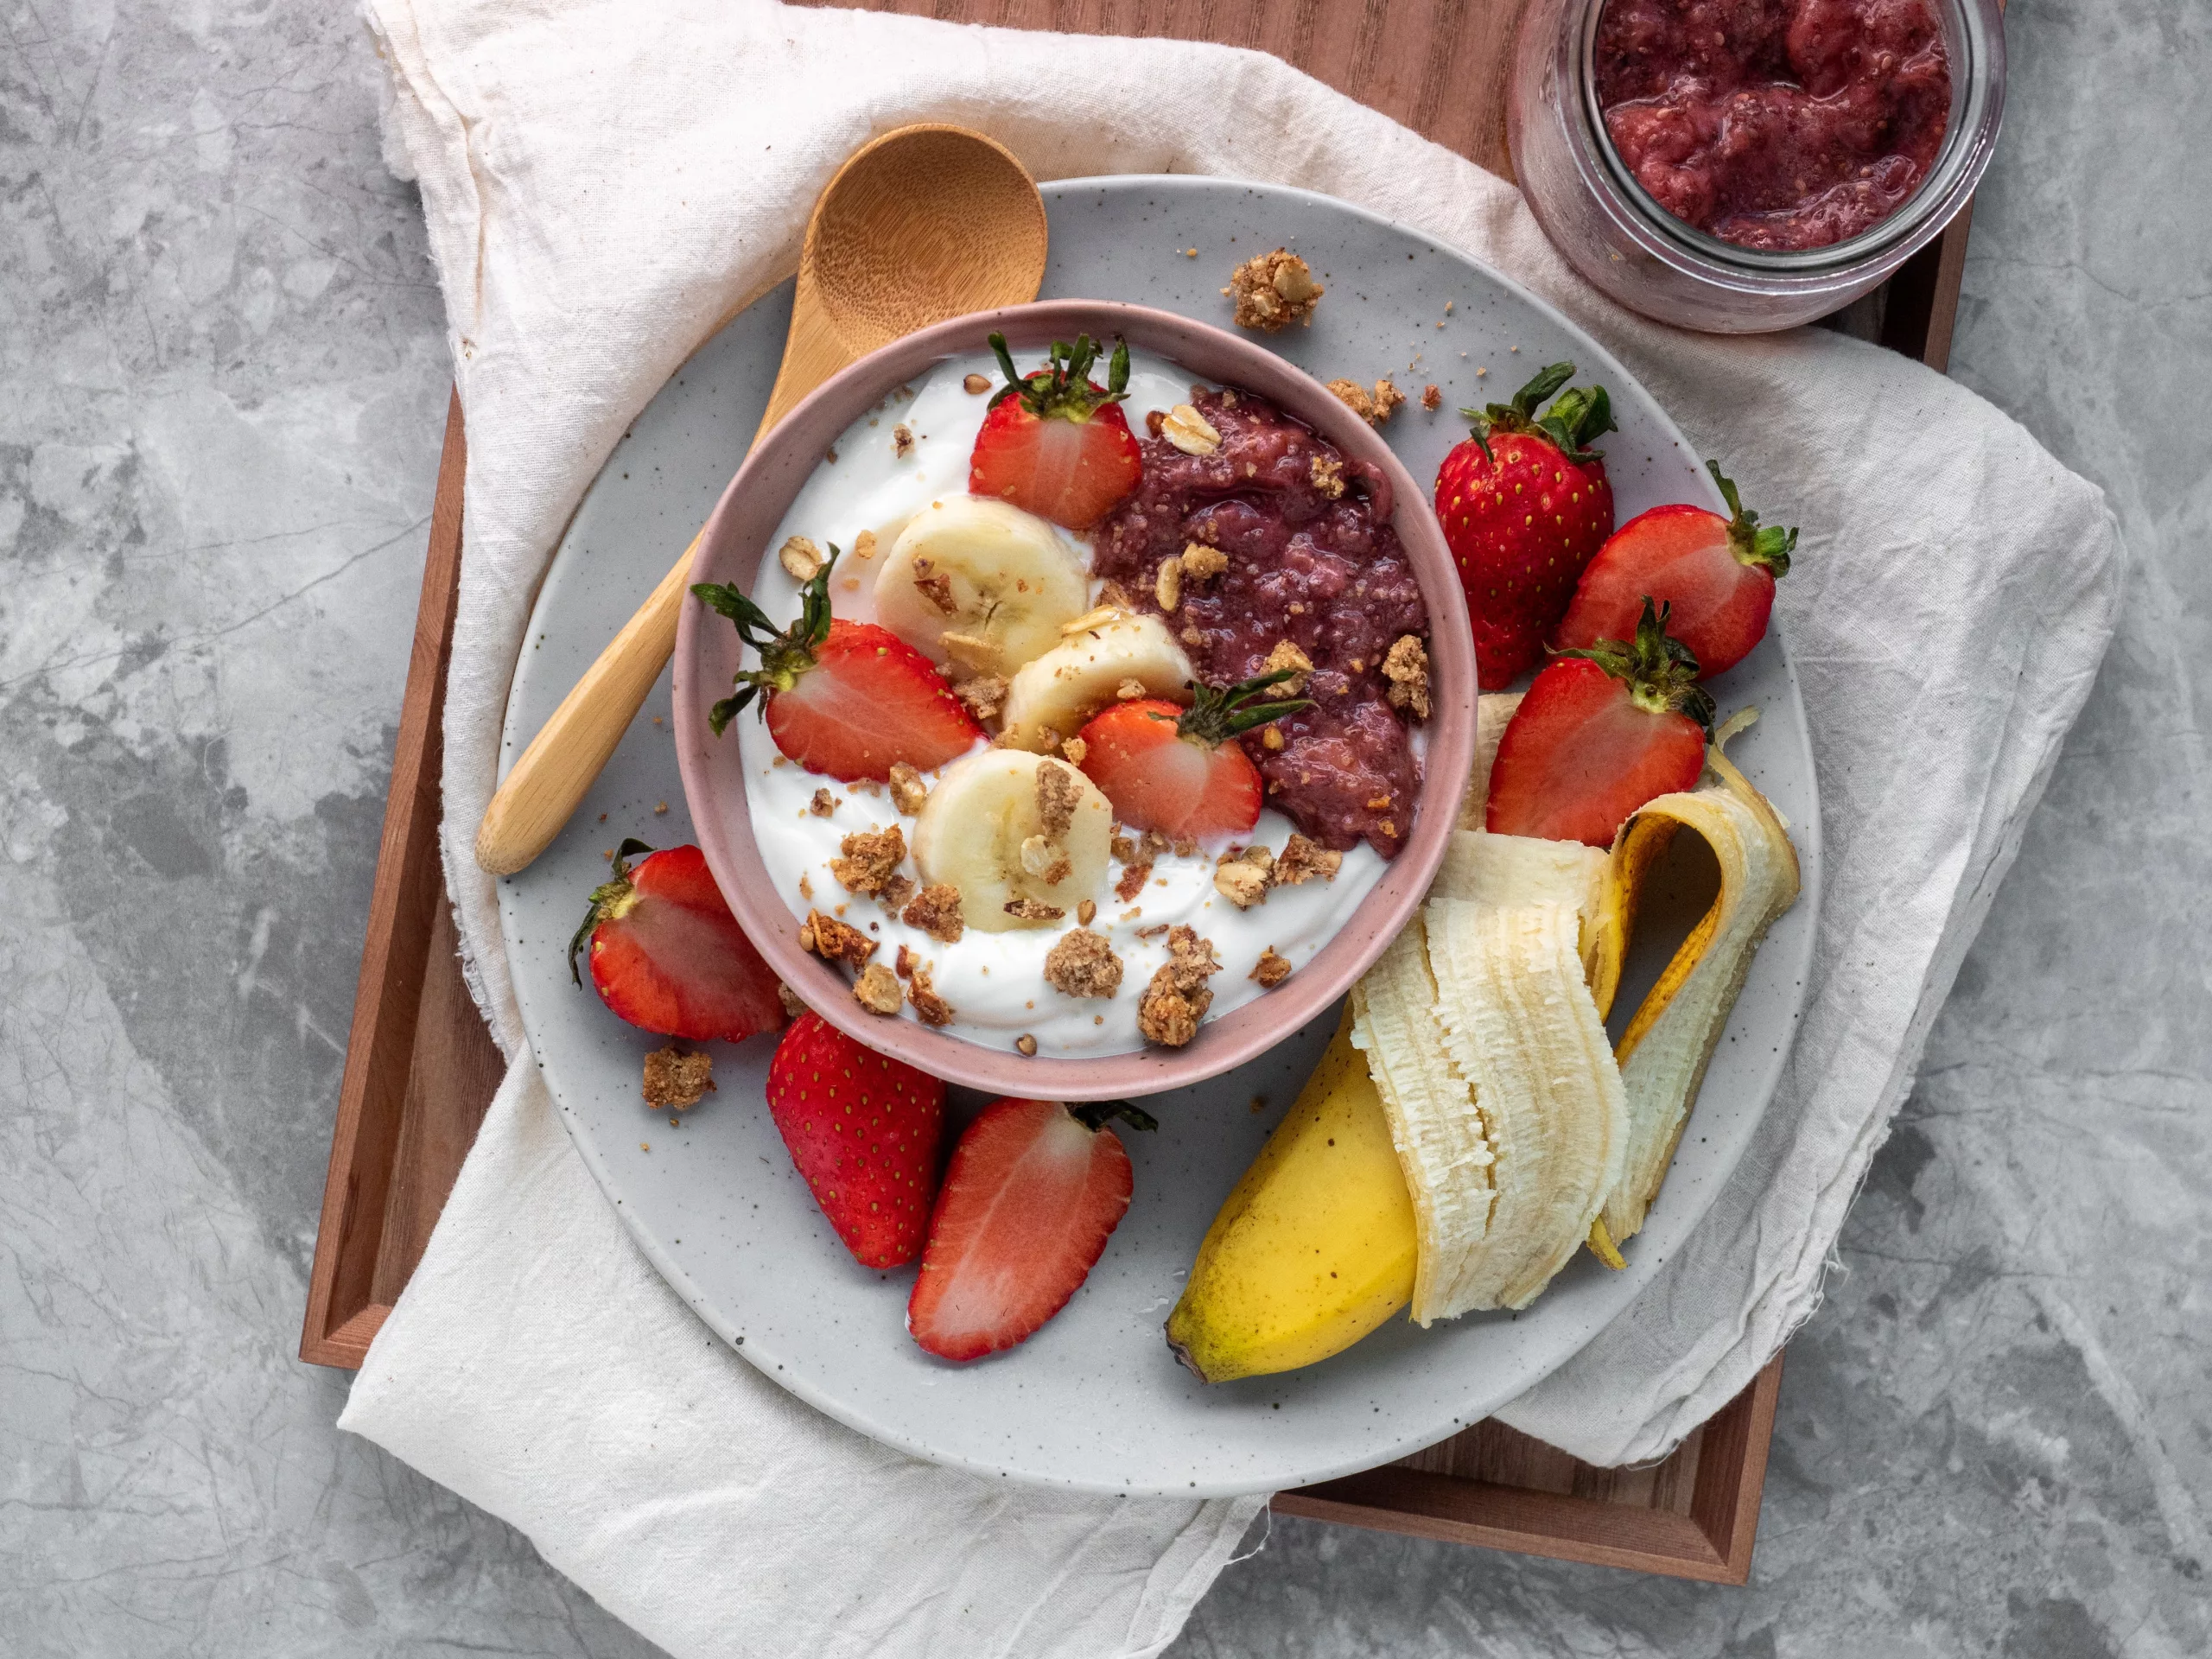 Creating a meal with both yogurt and fruit is a great way to combine prebiotics and probiotics